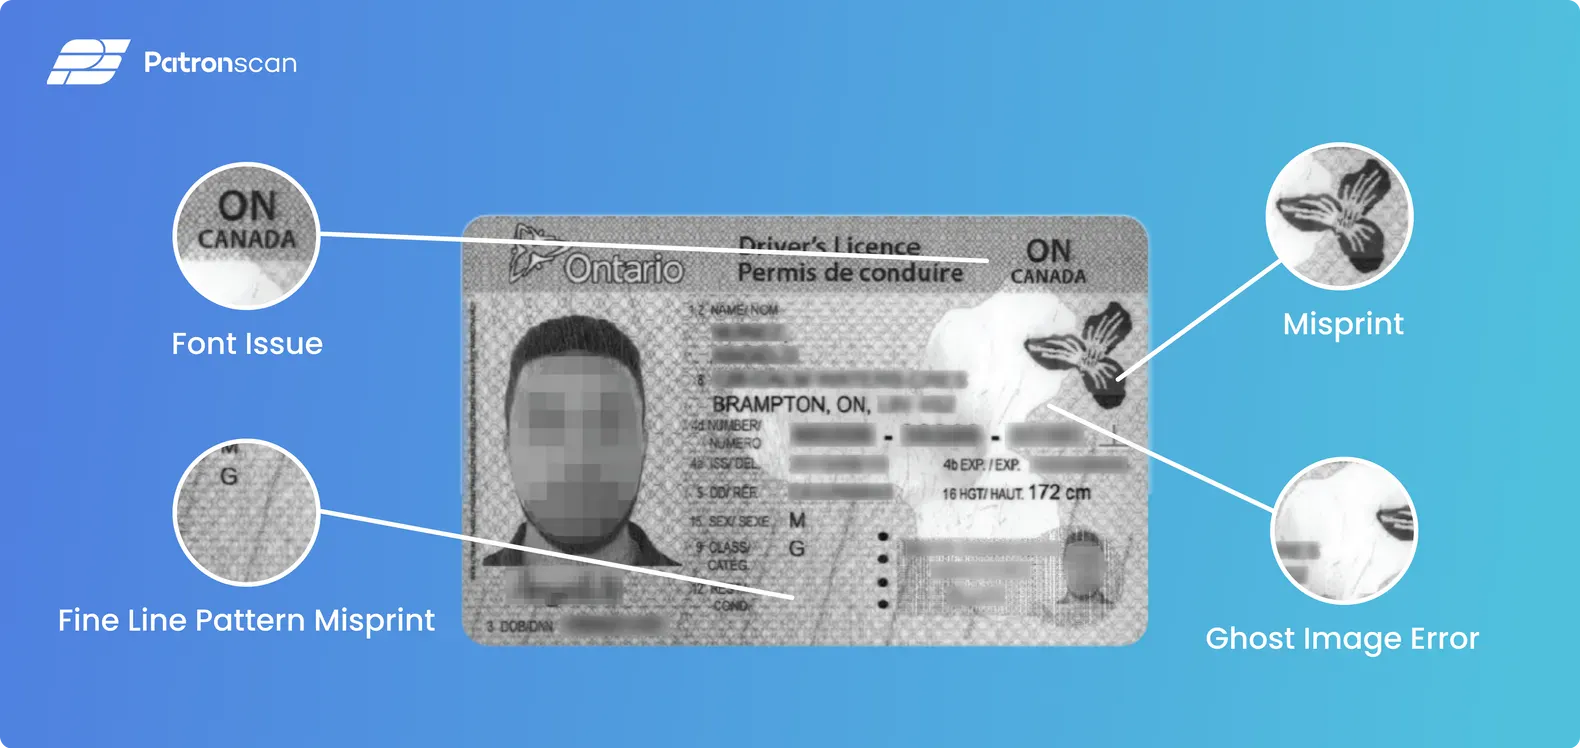 how to tell an id is fake